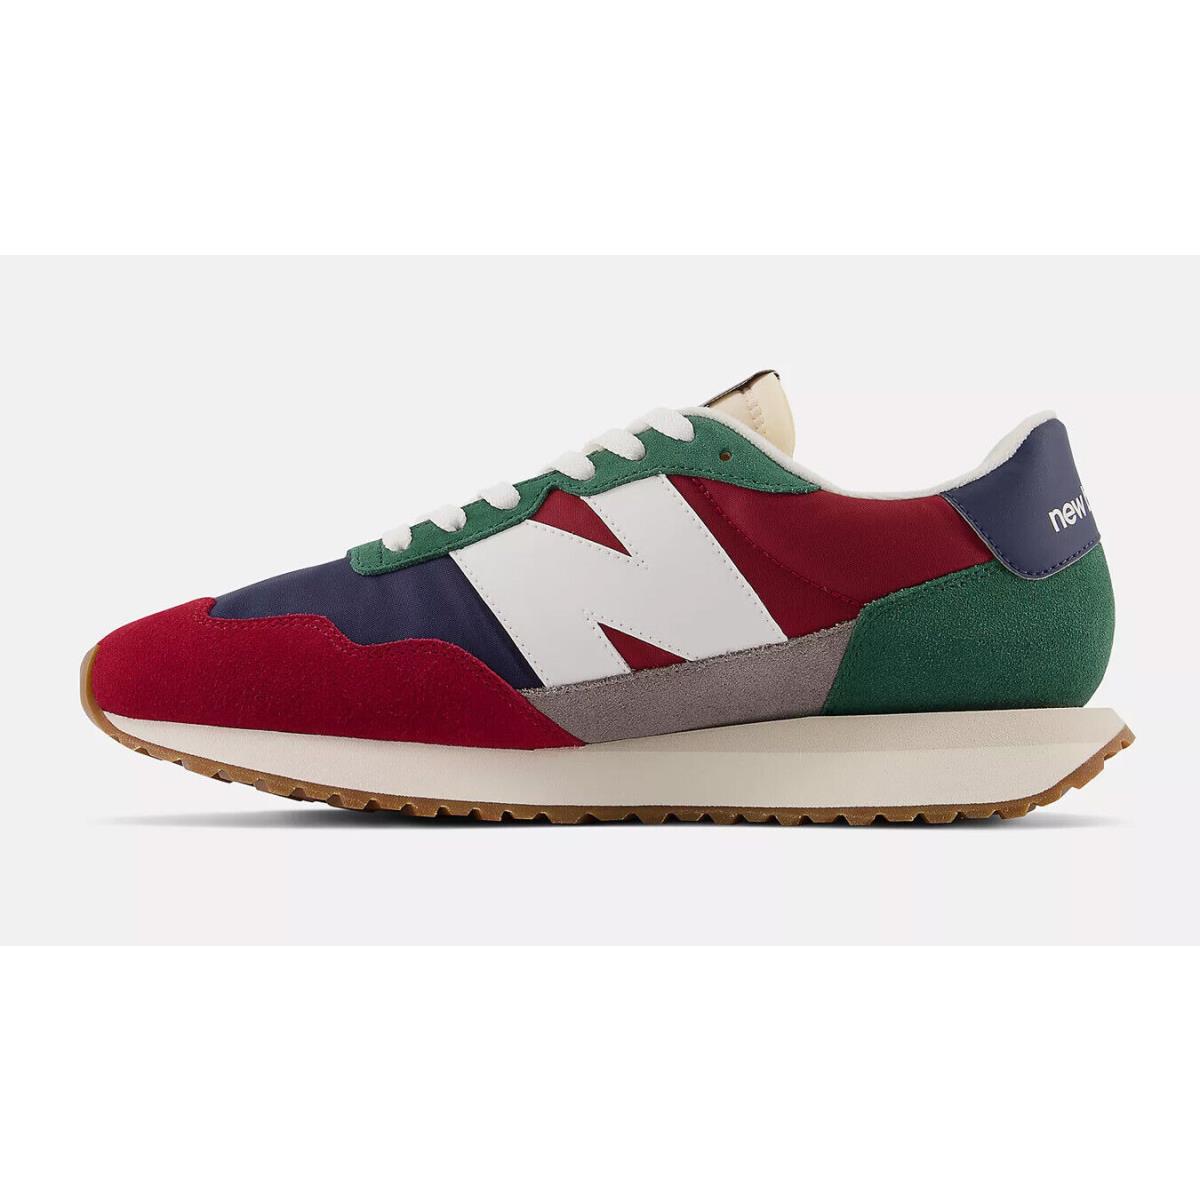 New Balance shoes  - Red/Green/Navy Blue 19